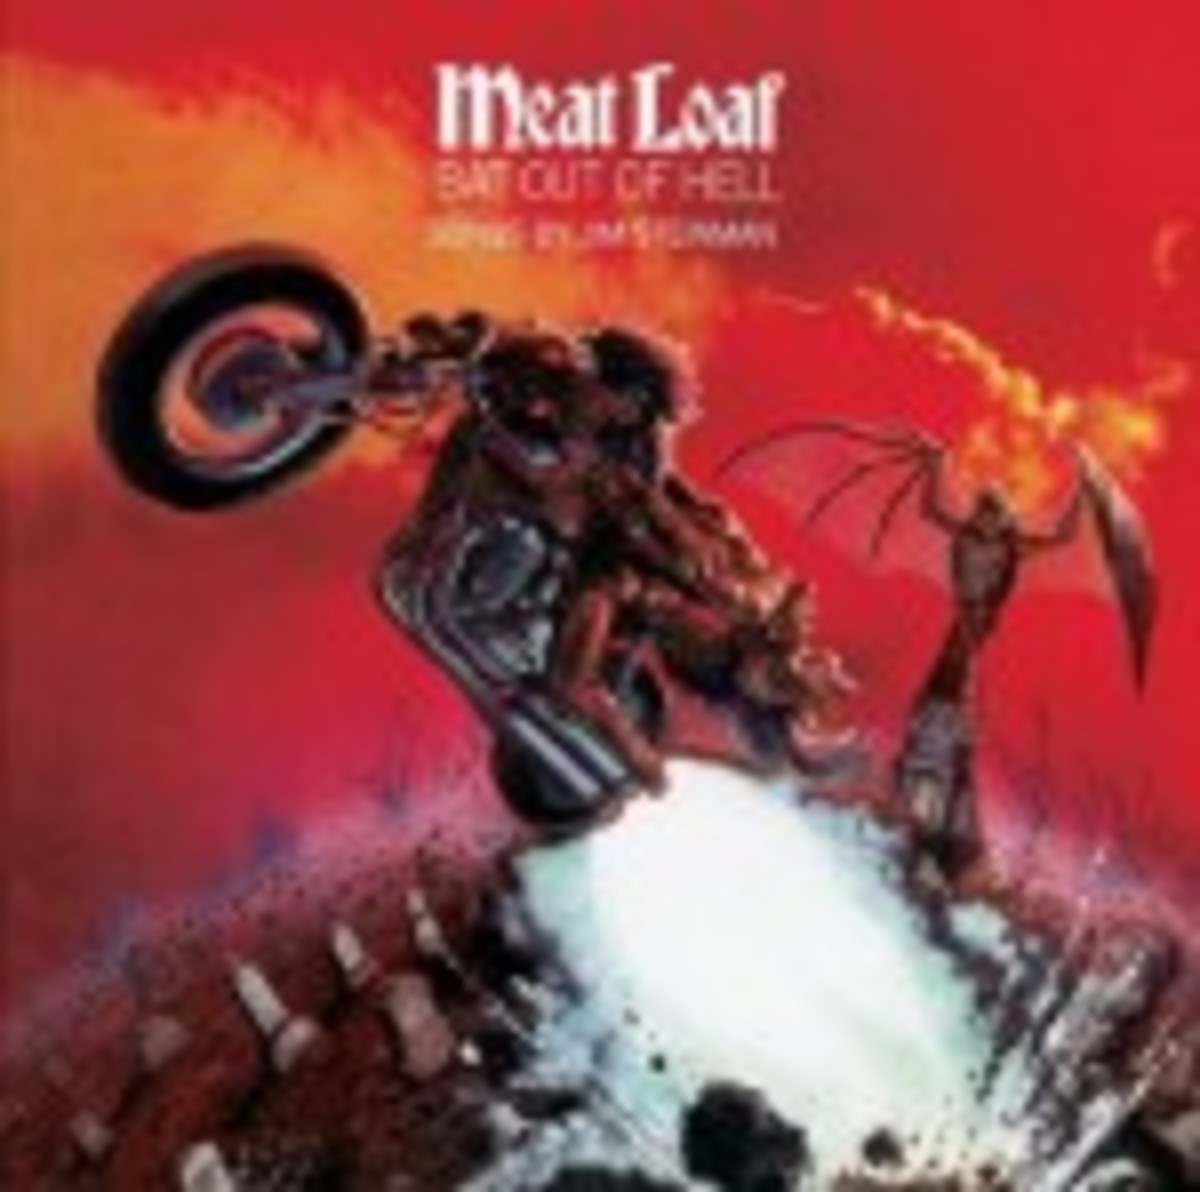 meat-loaf-bat-out-of-hell